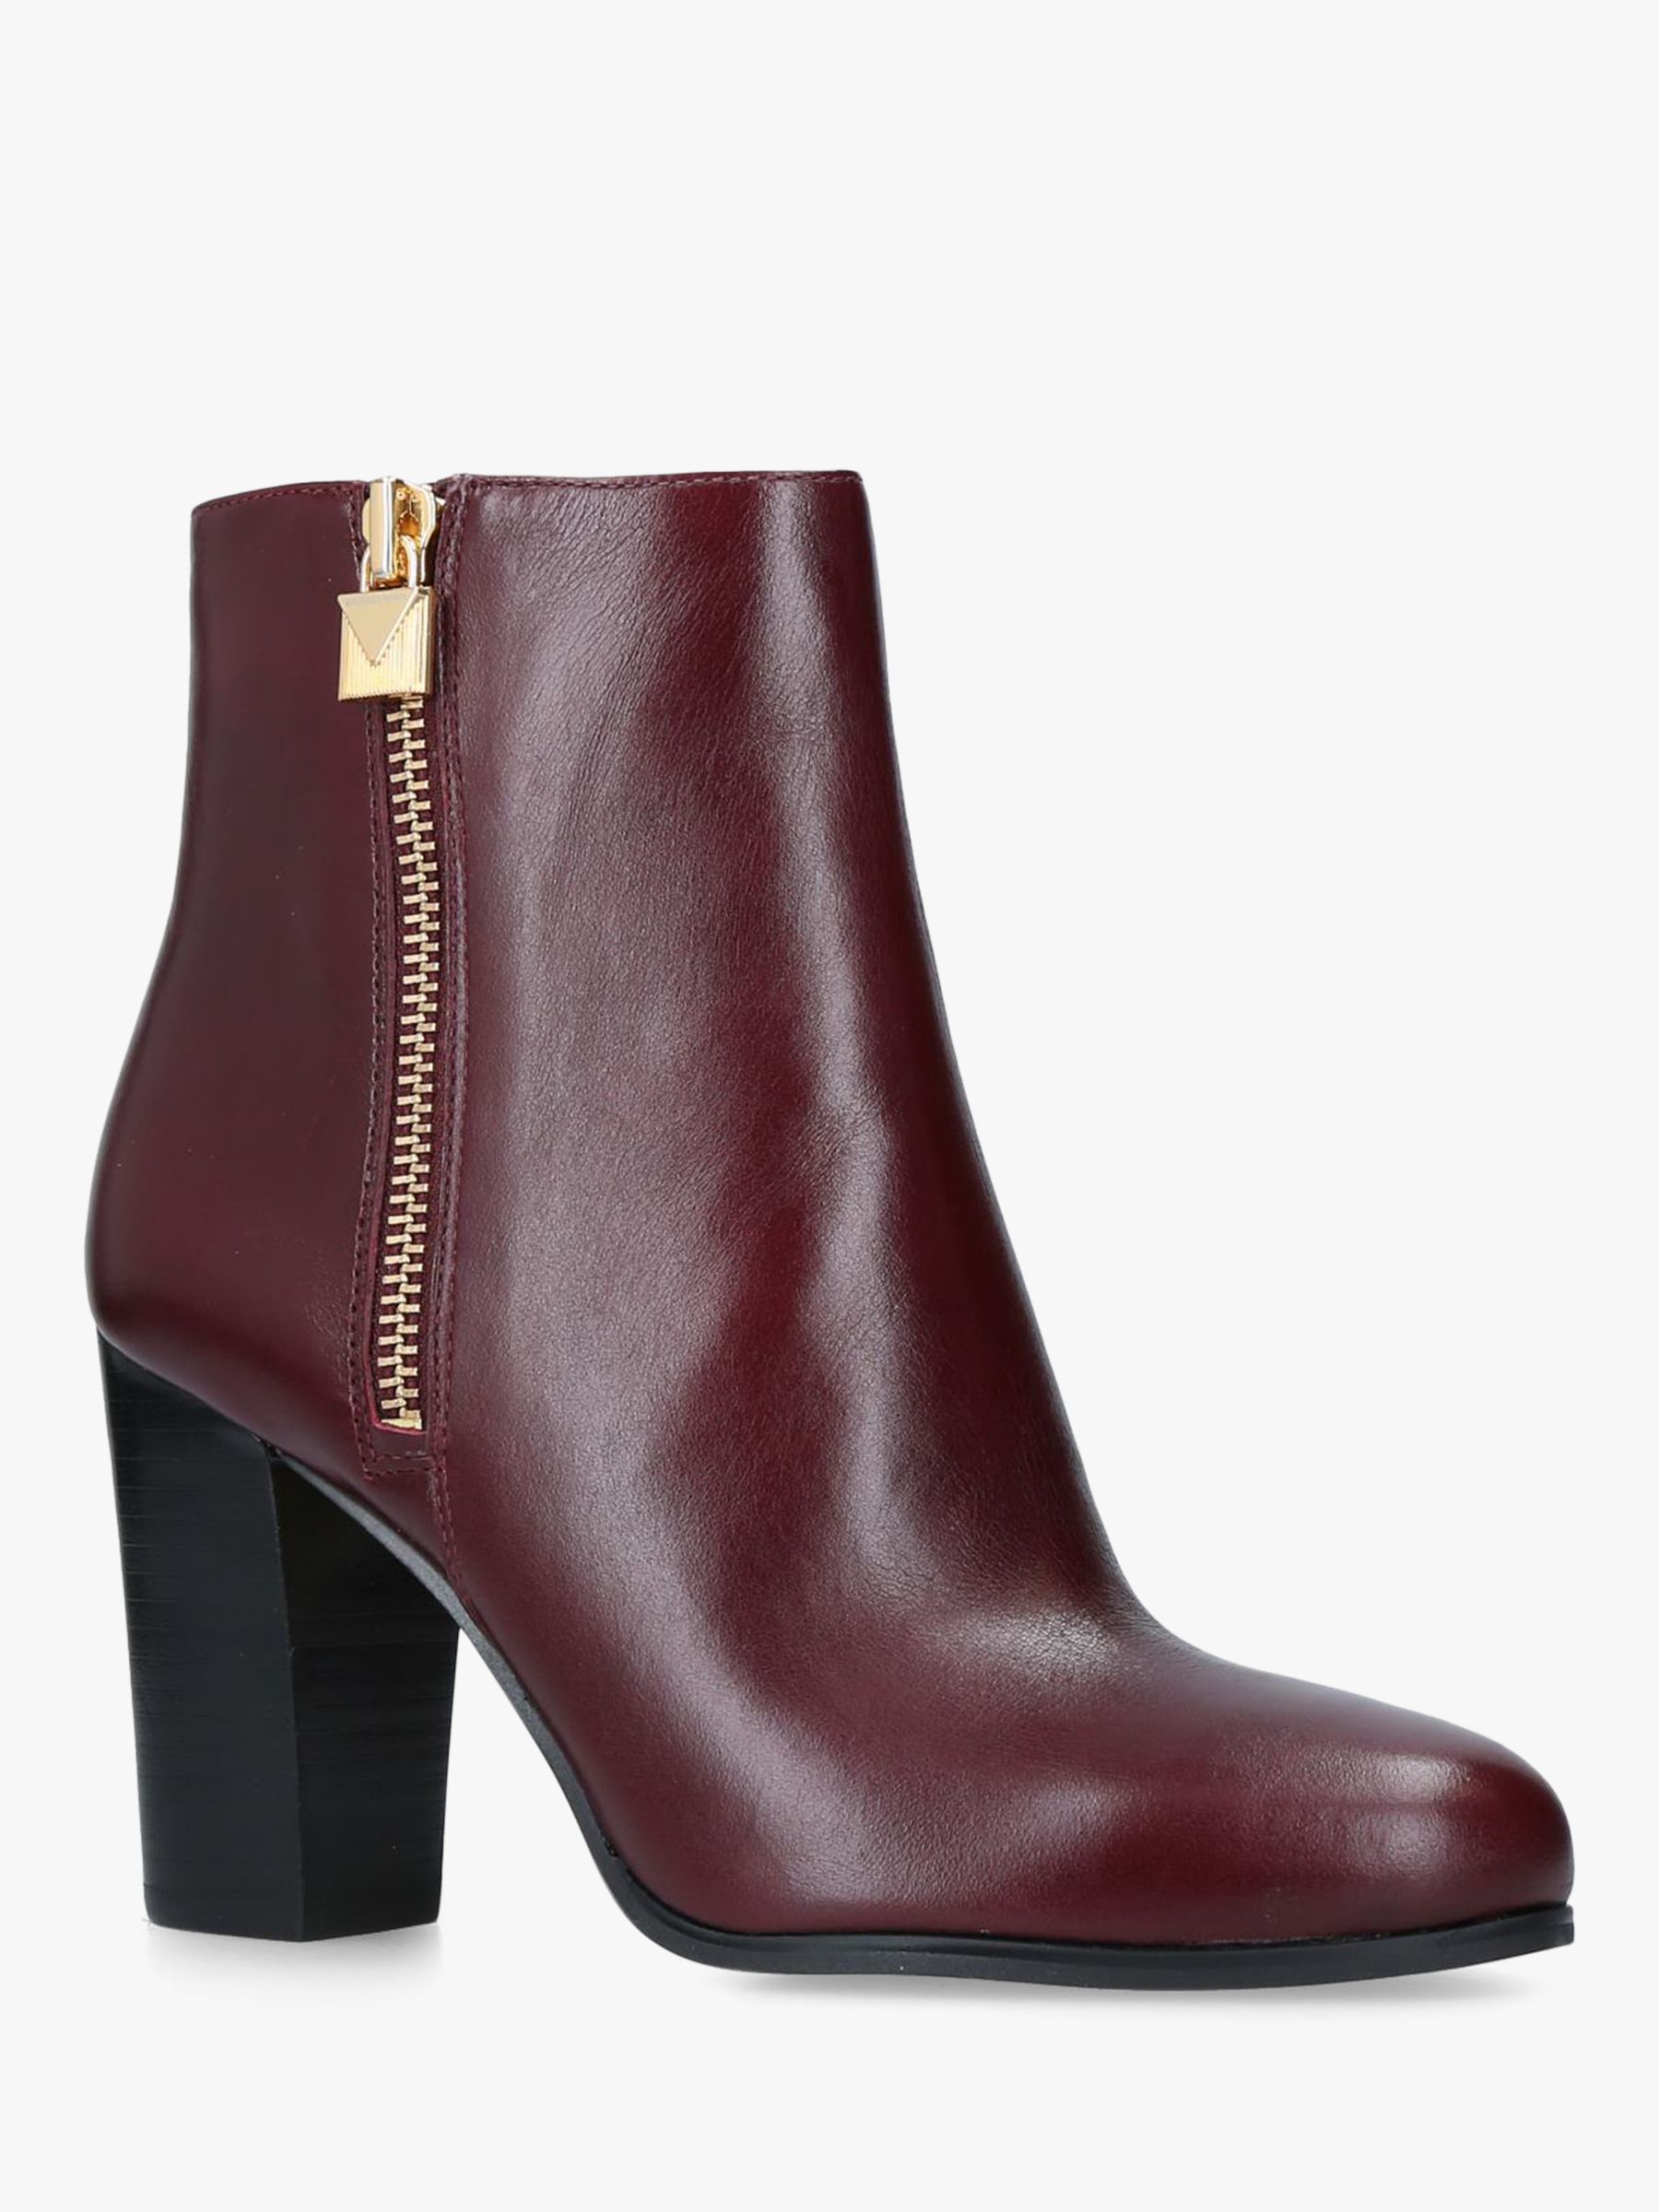 michael kors red boots